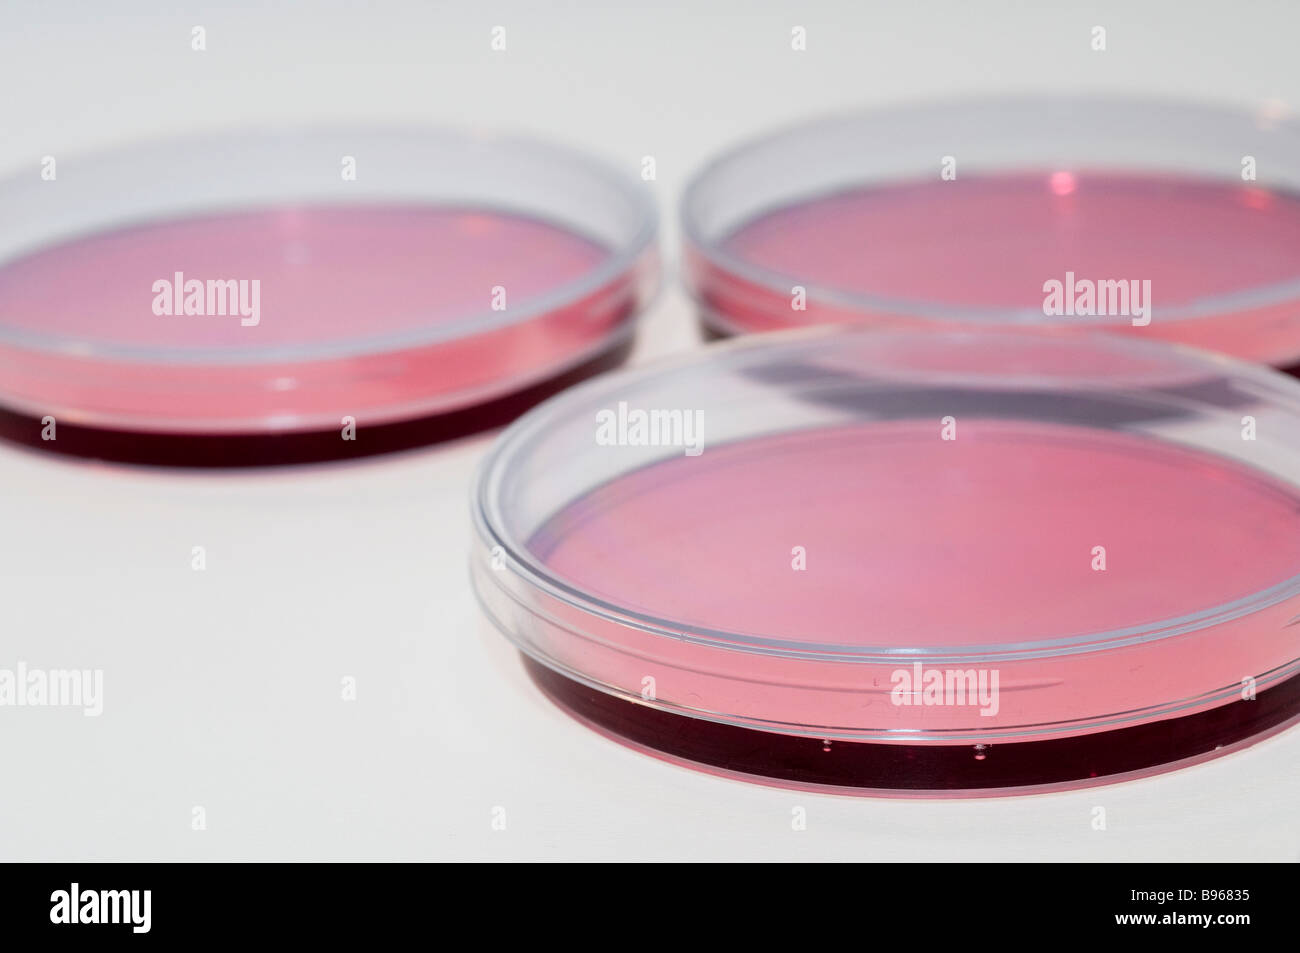 Cell cultures in Petri dishes Stock Photo